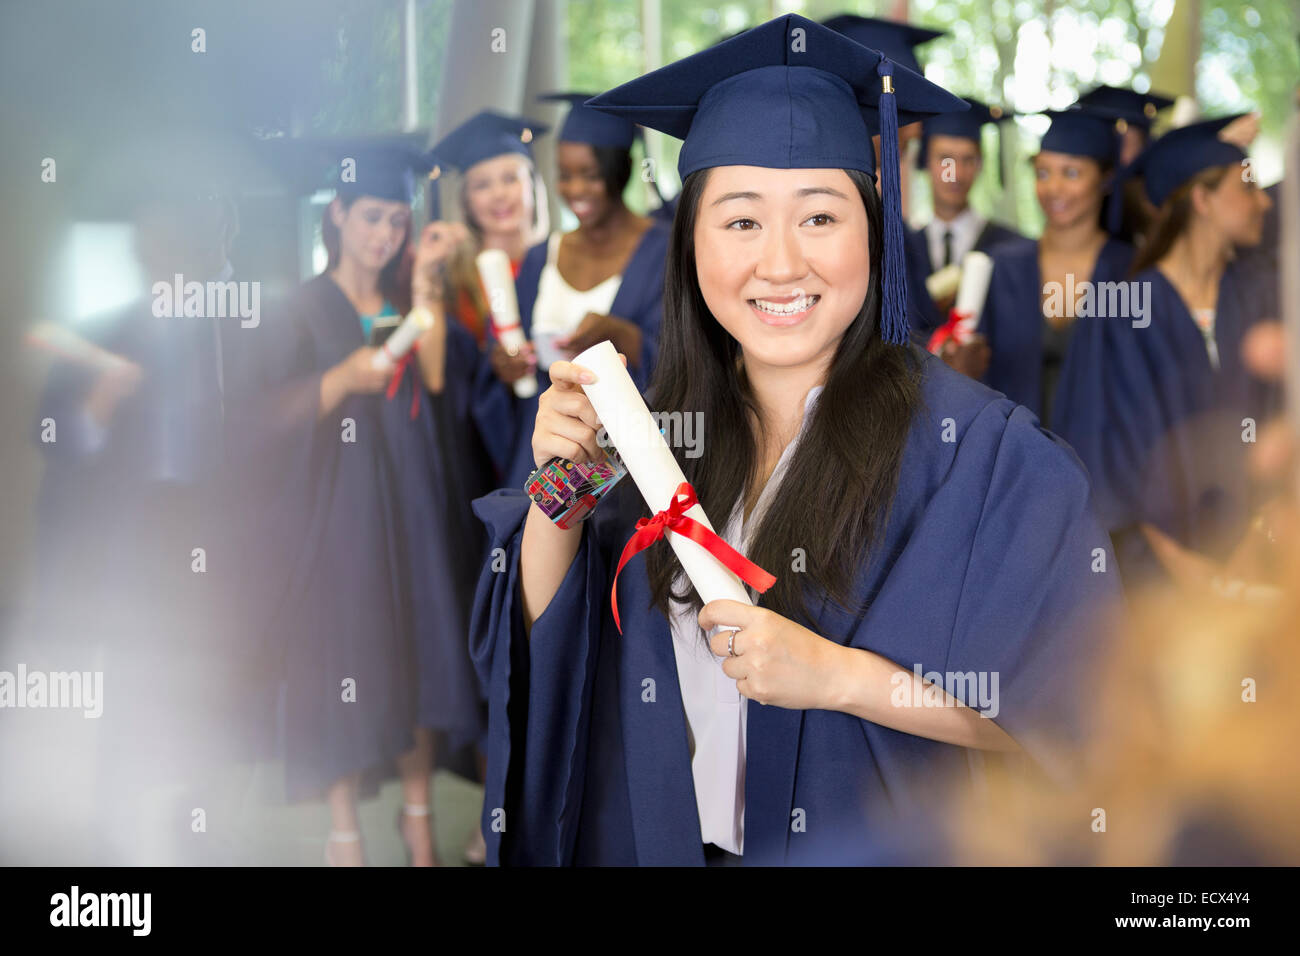 Portrait of smiling female student in graduation gown holding diploma Stock Photo